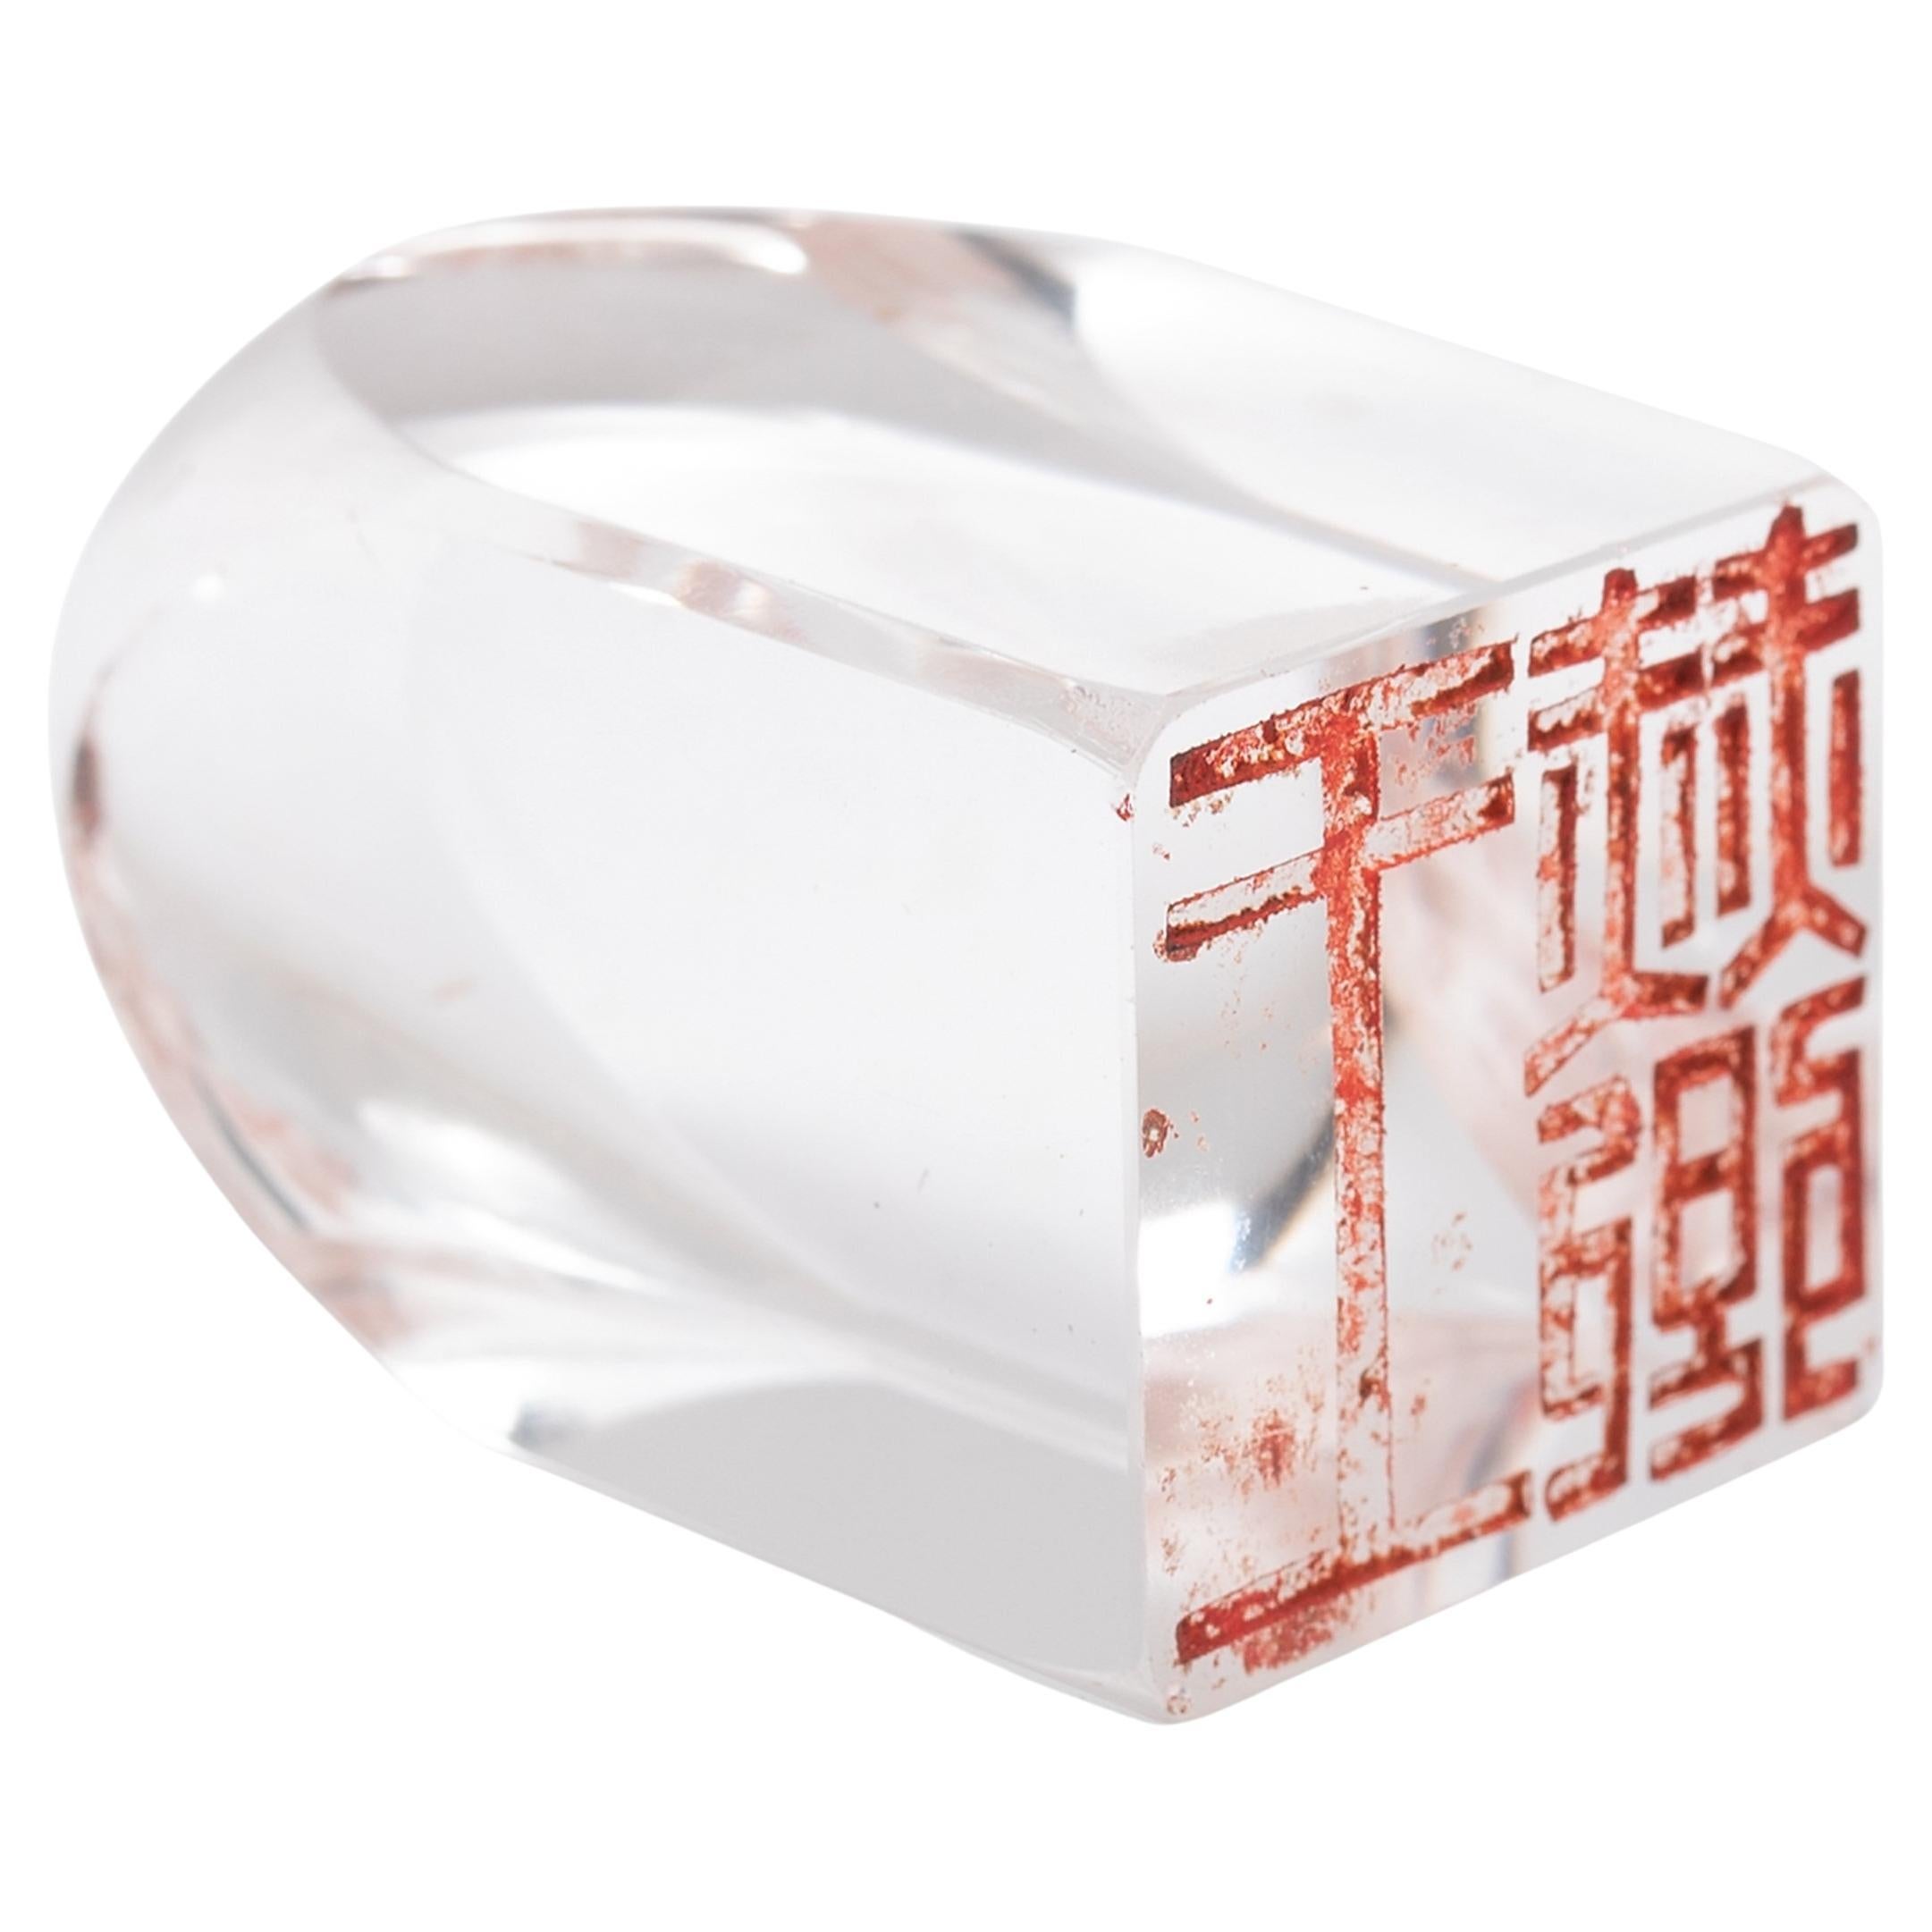 Chinese Rock Crystal Seal, C. 1900